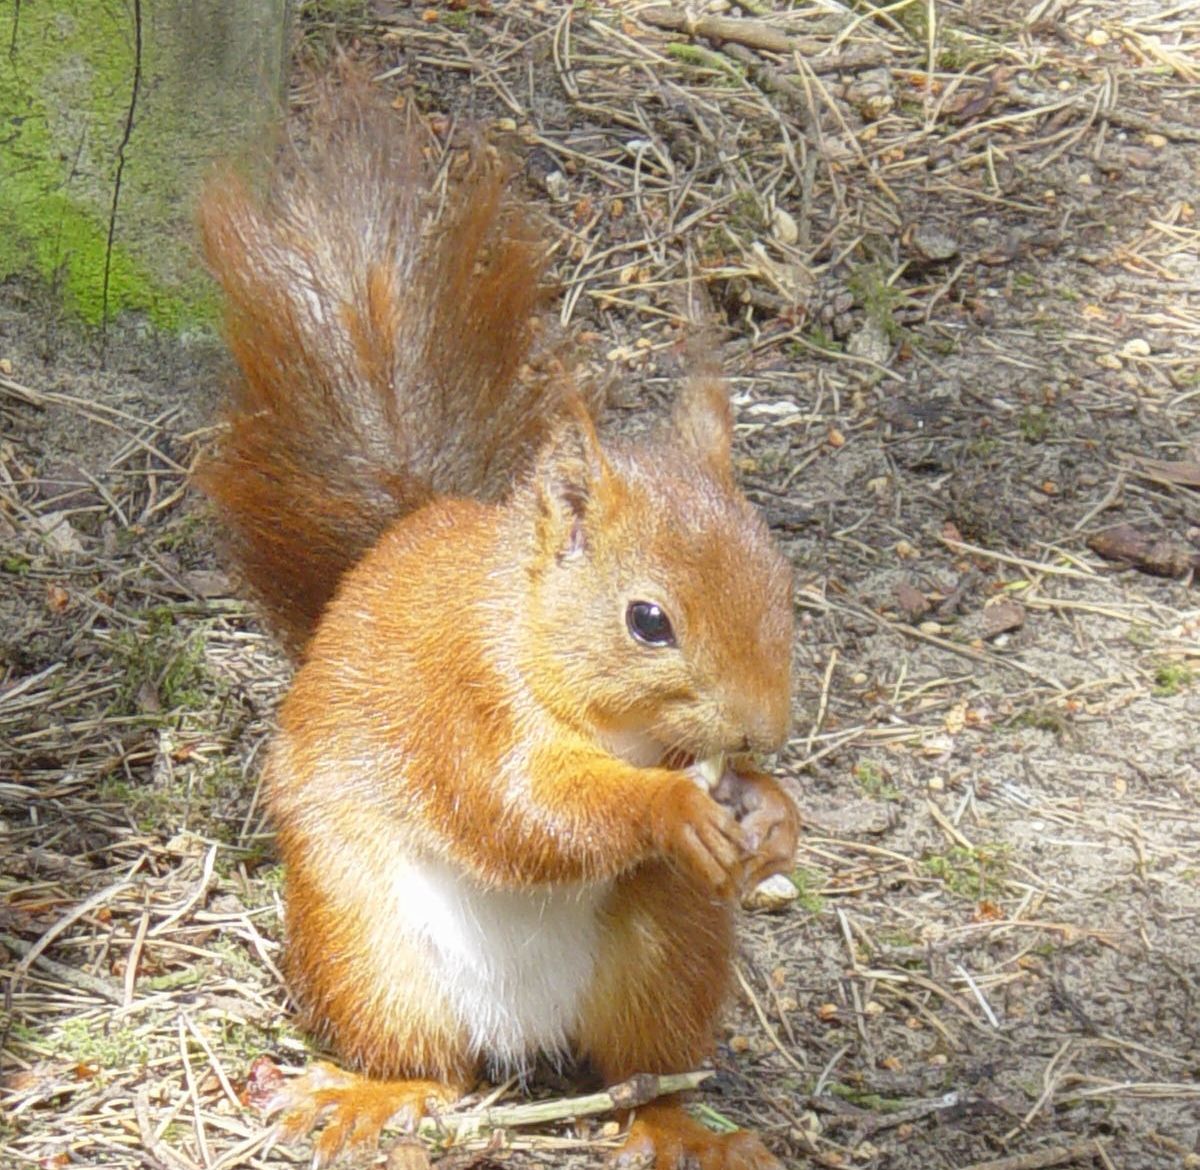 A red squirrel in the National Trust Nature reserve at Formby near Southport Photo Chris Horan